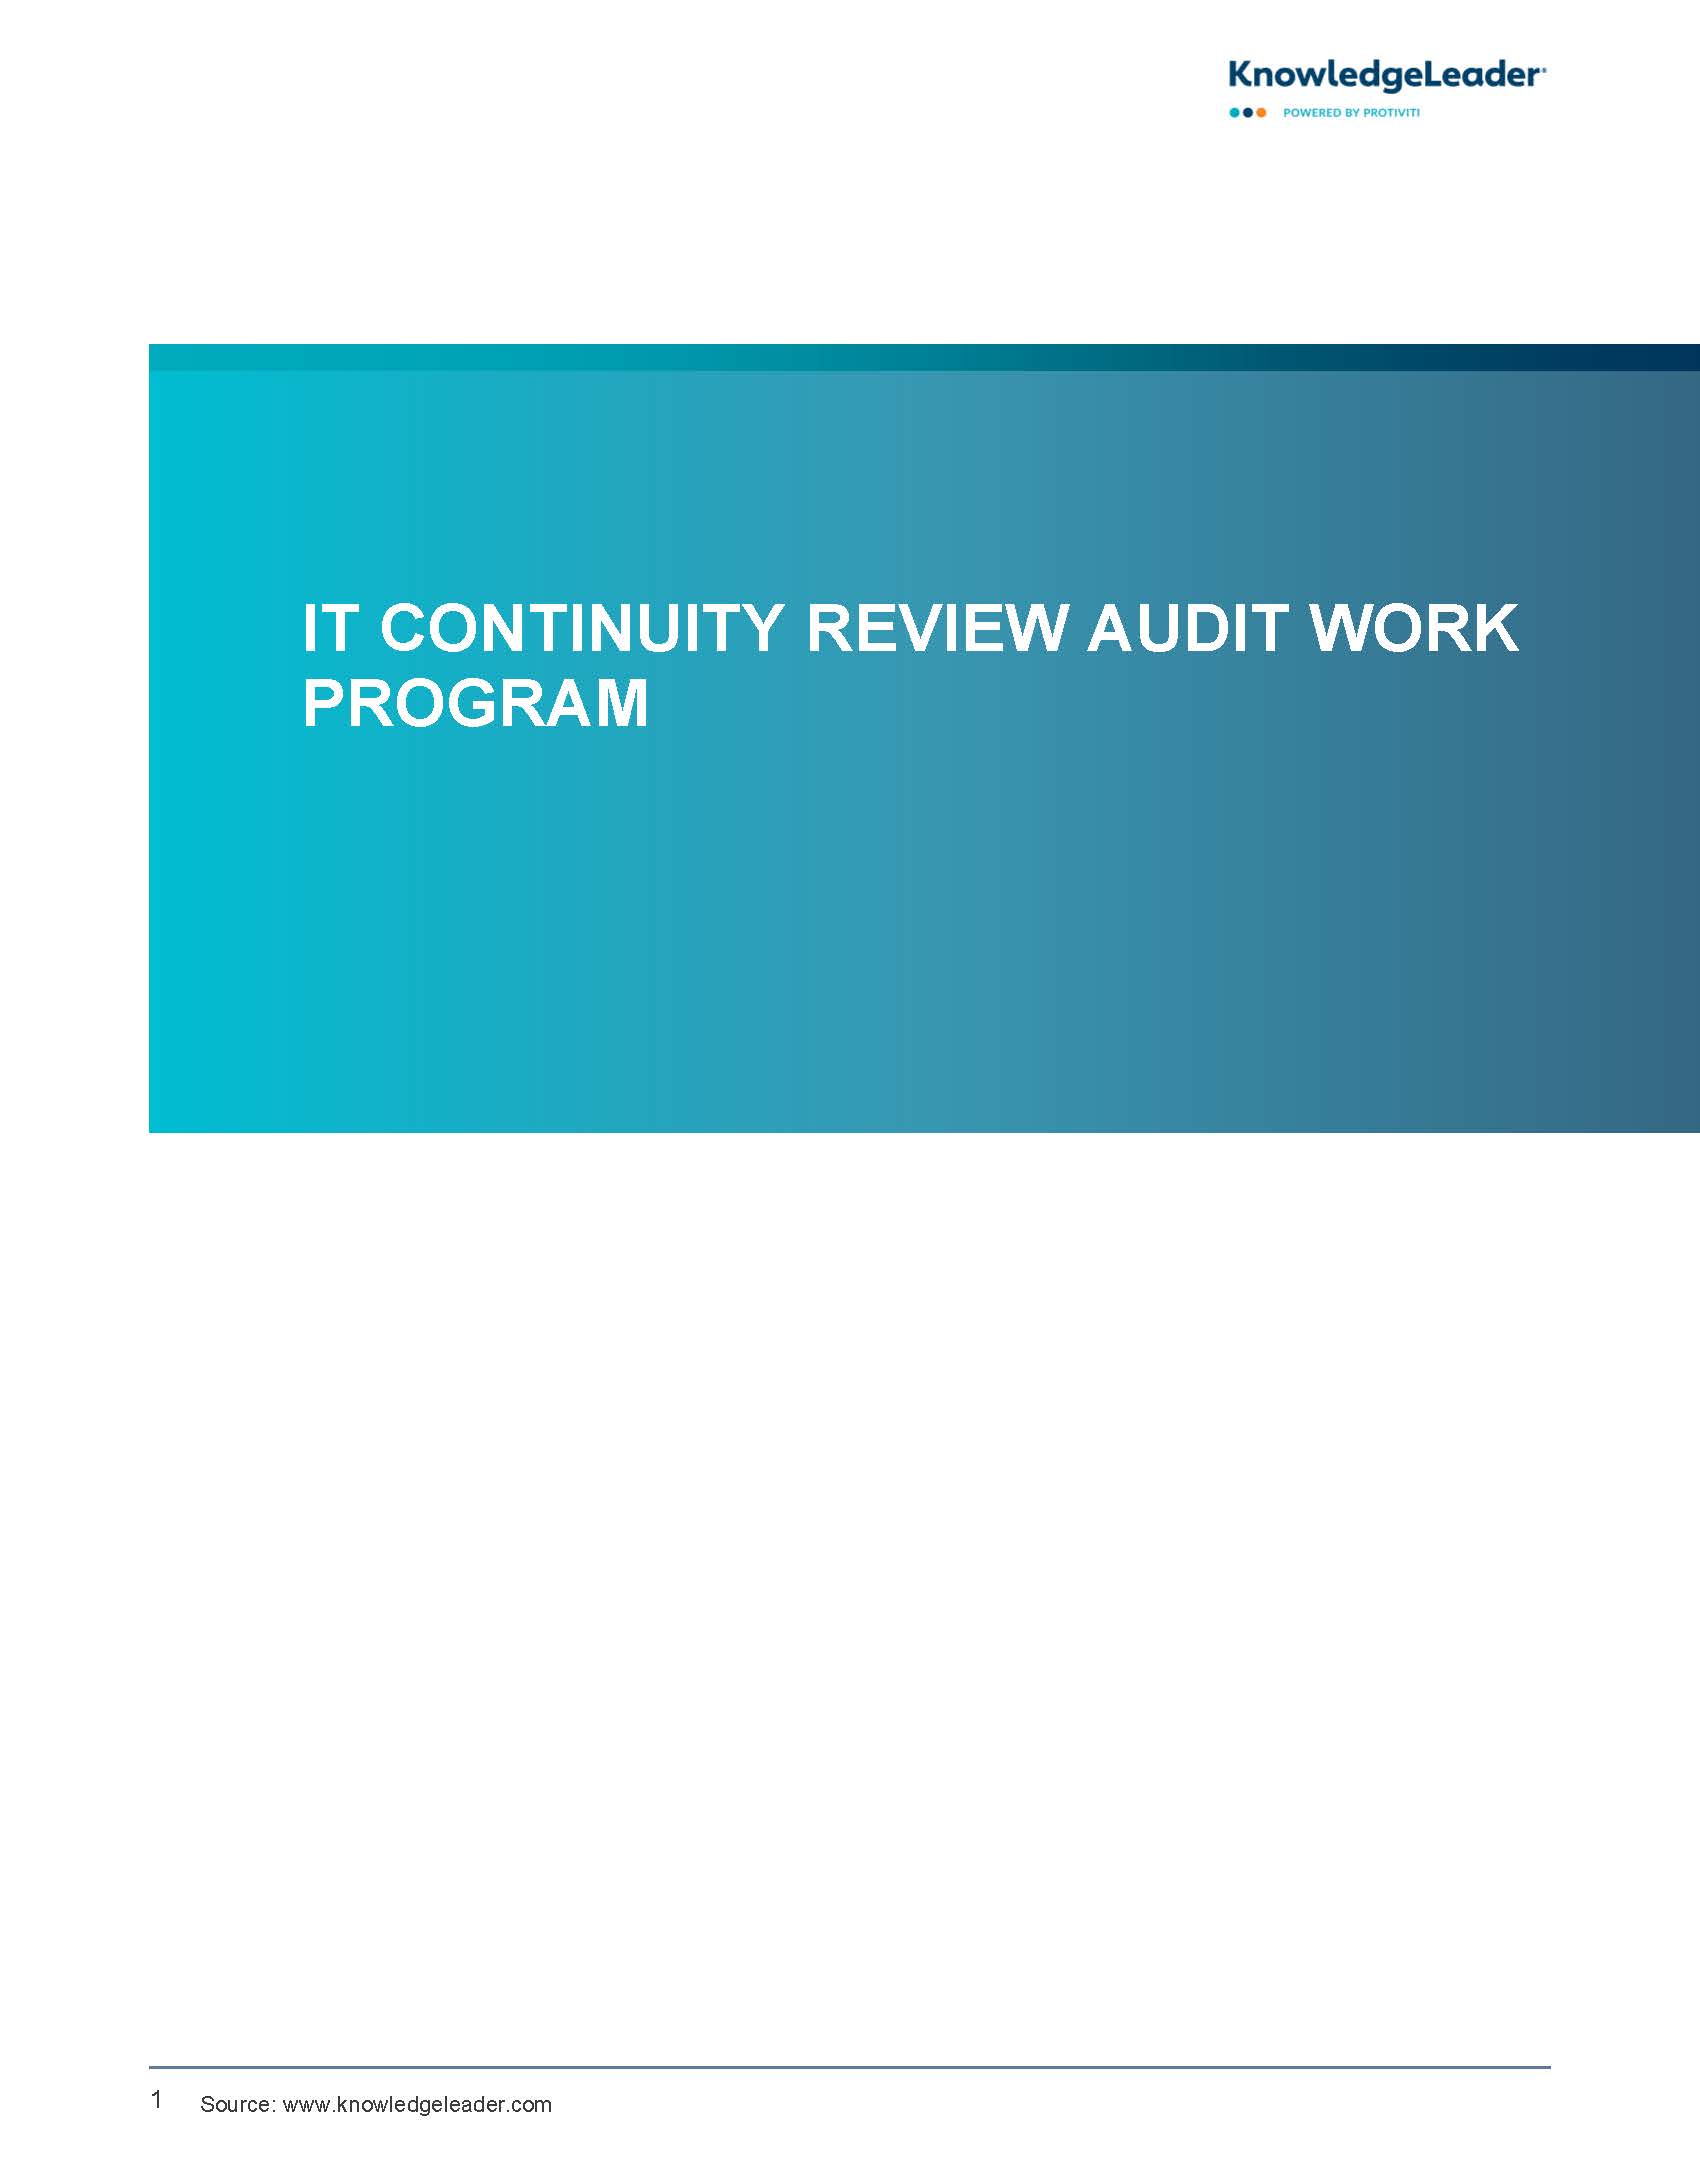 Screenshot of the first page of IT Continuity Review Audit Work Program